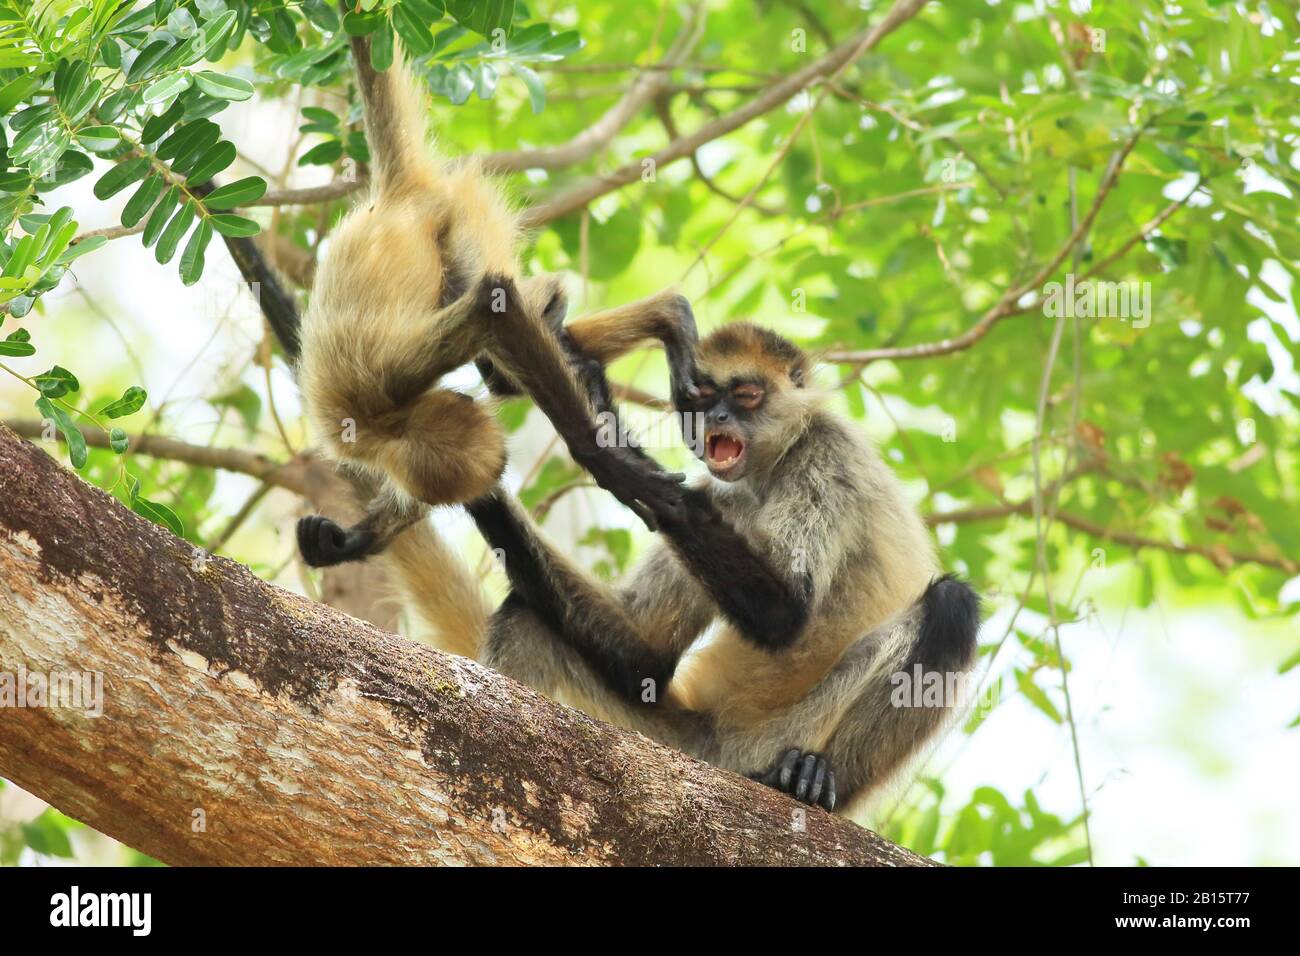 Central American Spider Monkeys (Ateles geoffroyi) playing. Santa Rosa National Park, Guanacaste, Costa Rica. May 2017. Stock Photo